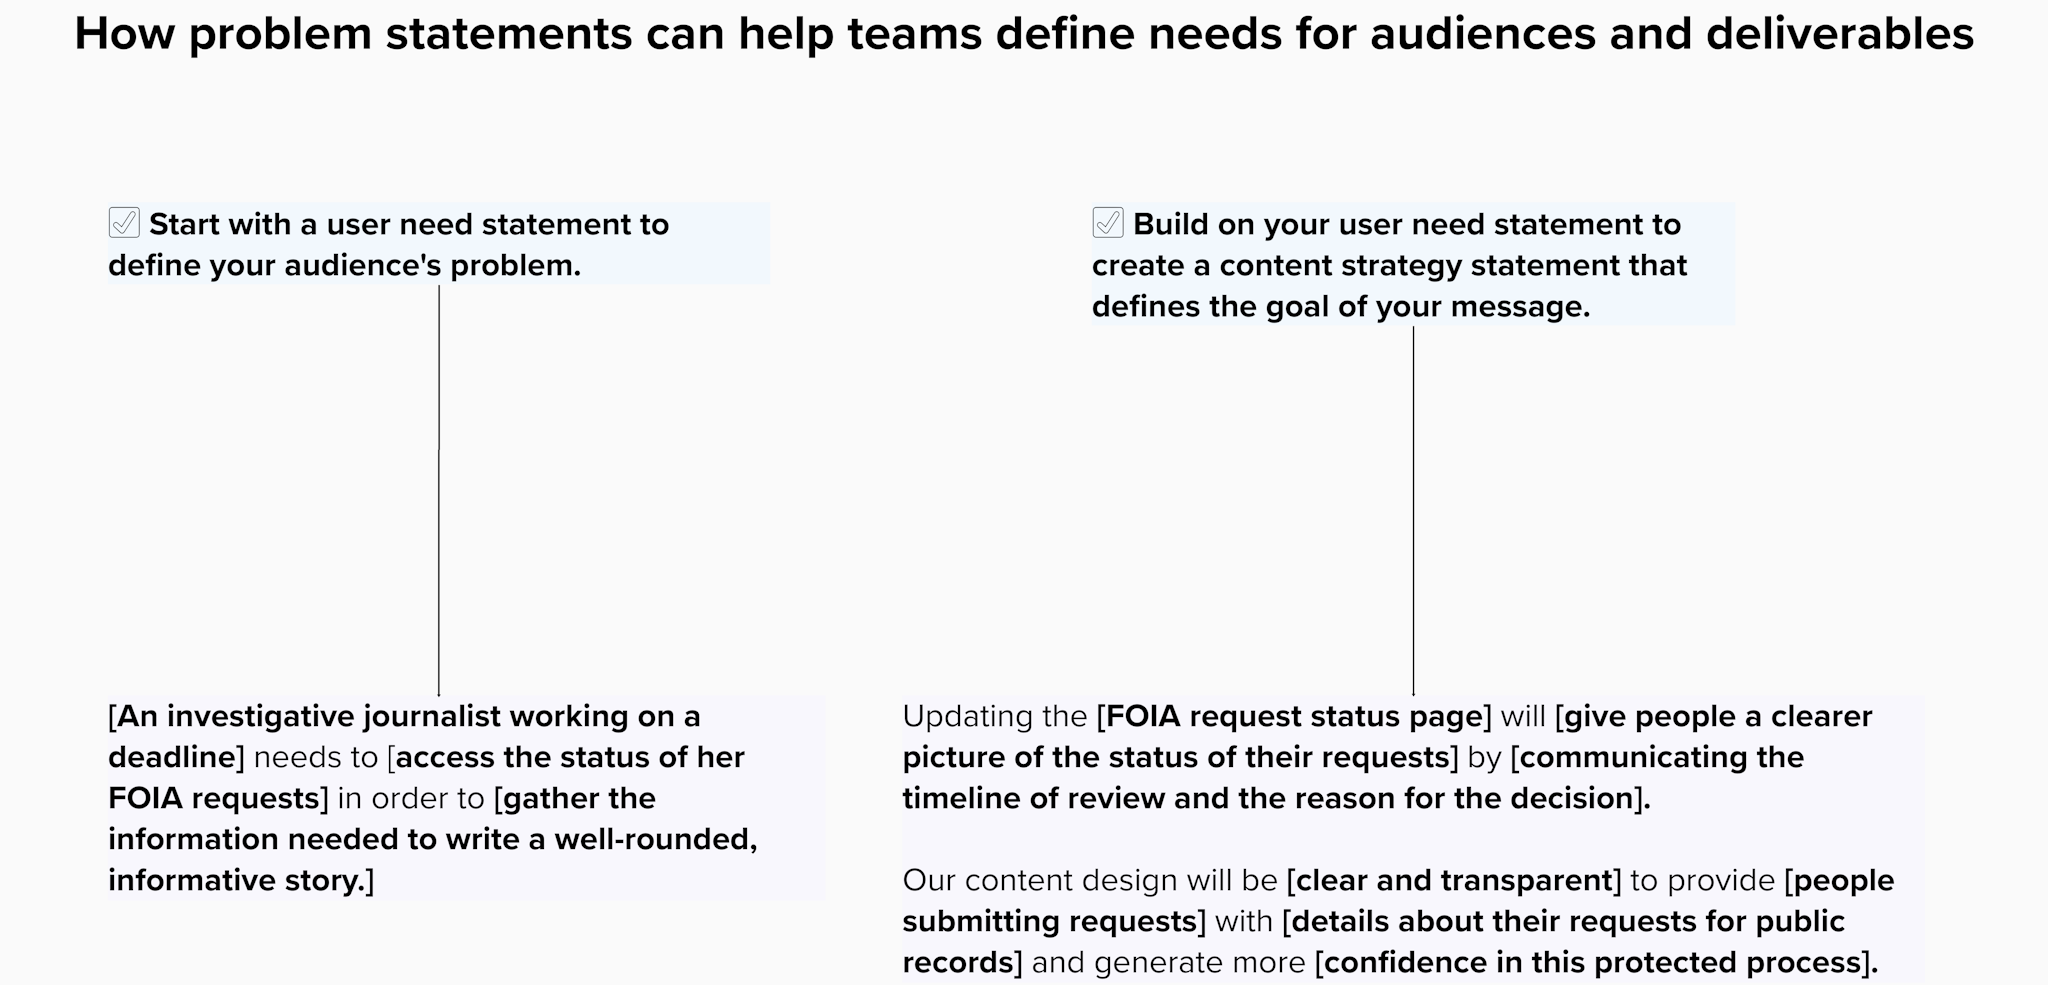 A diagram showing how problem statements can help teams define needs for audiences and deliverables. 